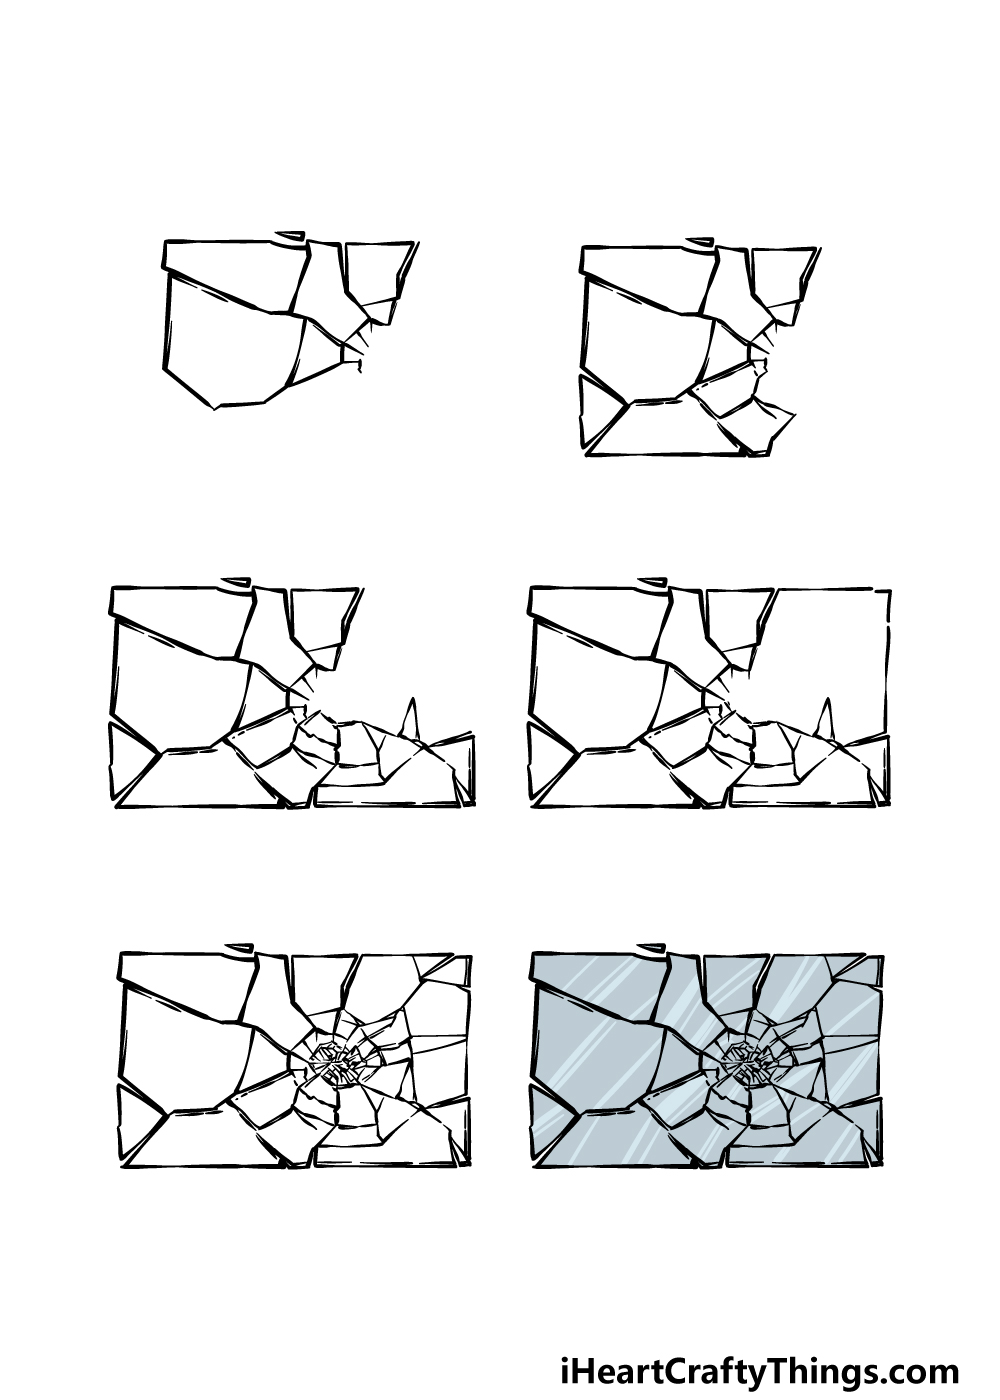 how to draw broken glass in 6 steps